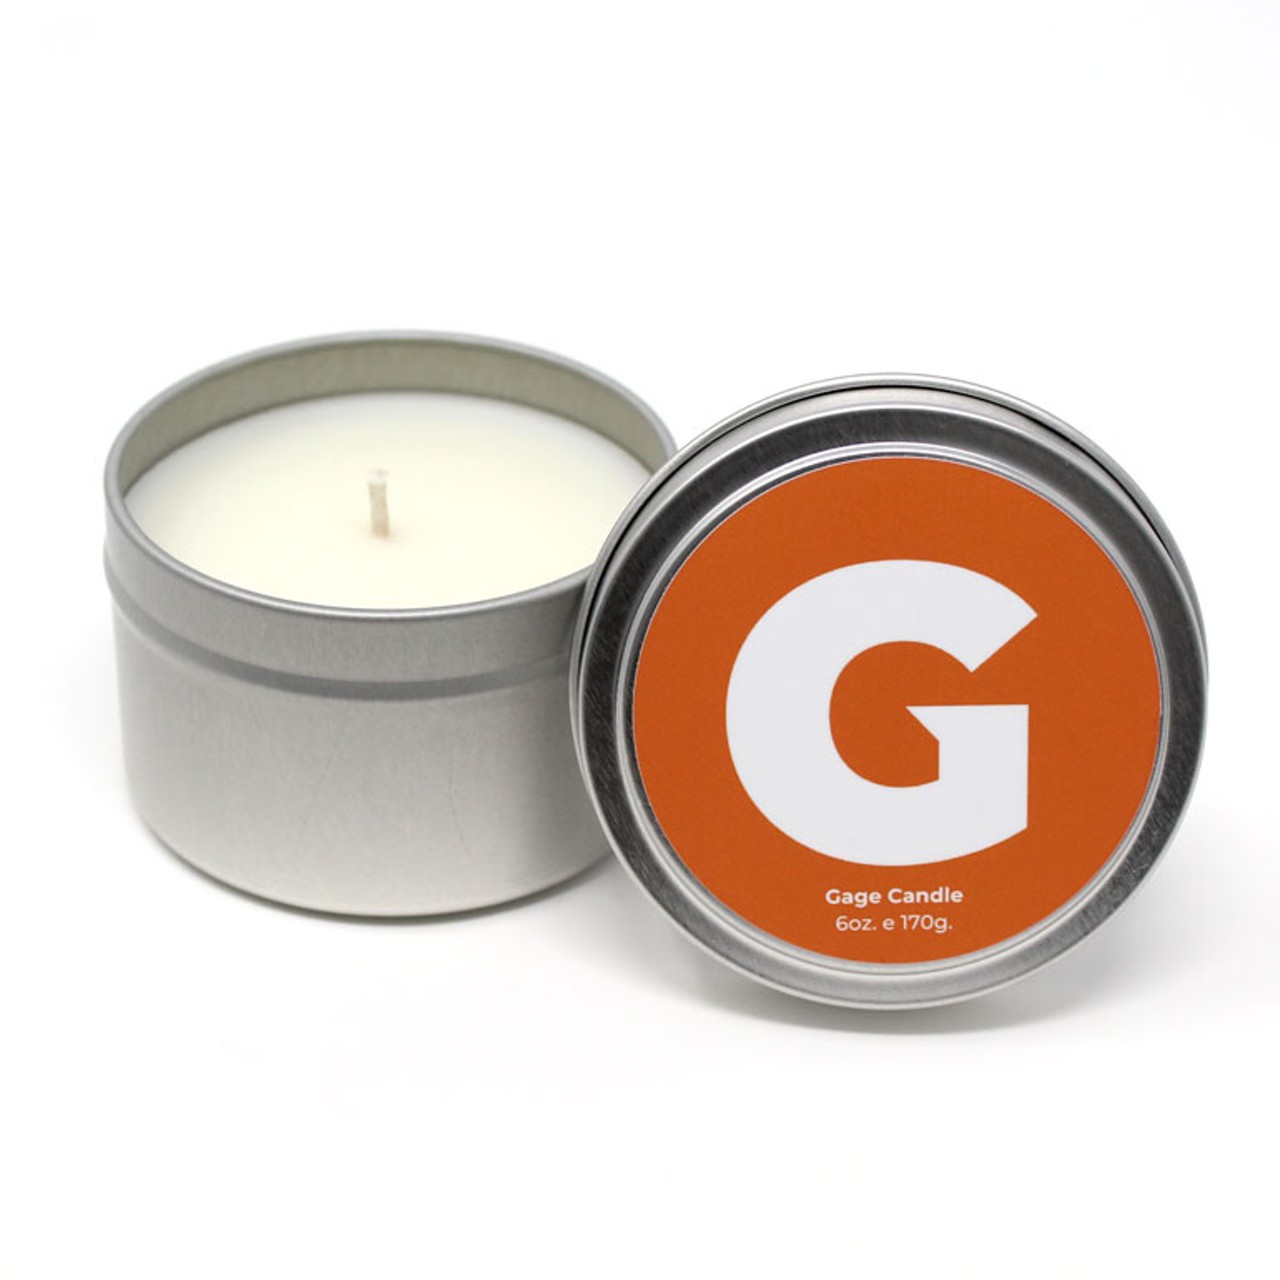 Gage Candle
Available from: Gage Cannabis Co.; 1551 Academy St., Ferndale; 248-504-0506; gageusa.com
Gage Candle. $20.
Photo courtesy of Gage Cannabis Co.